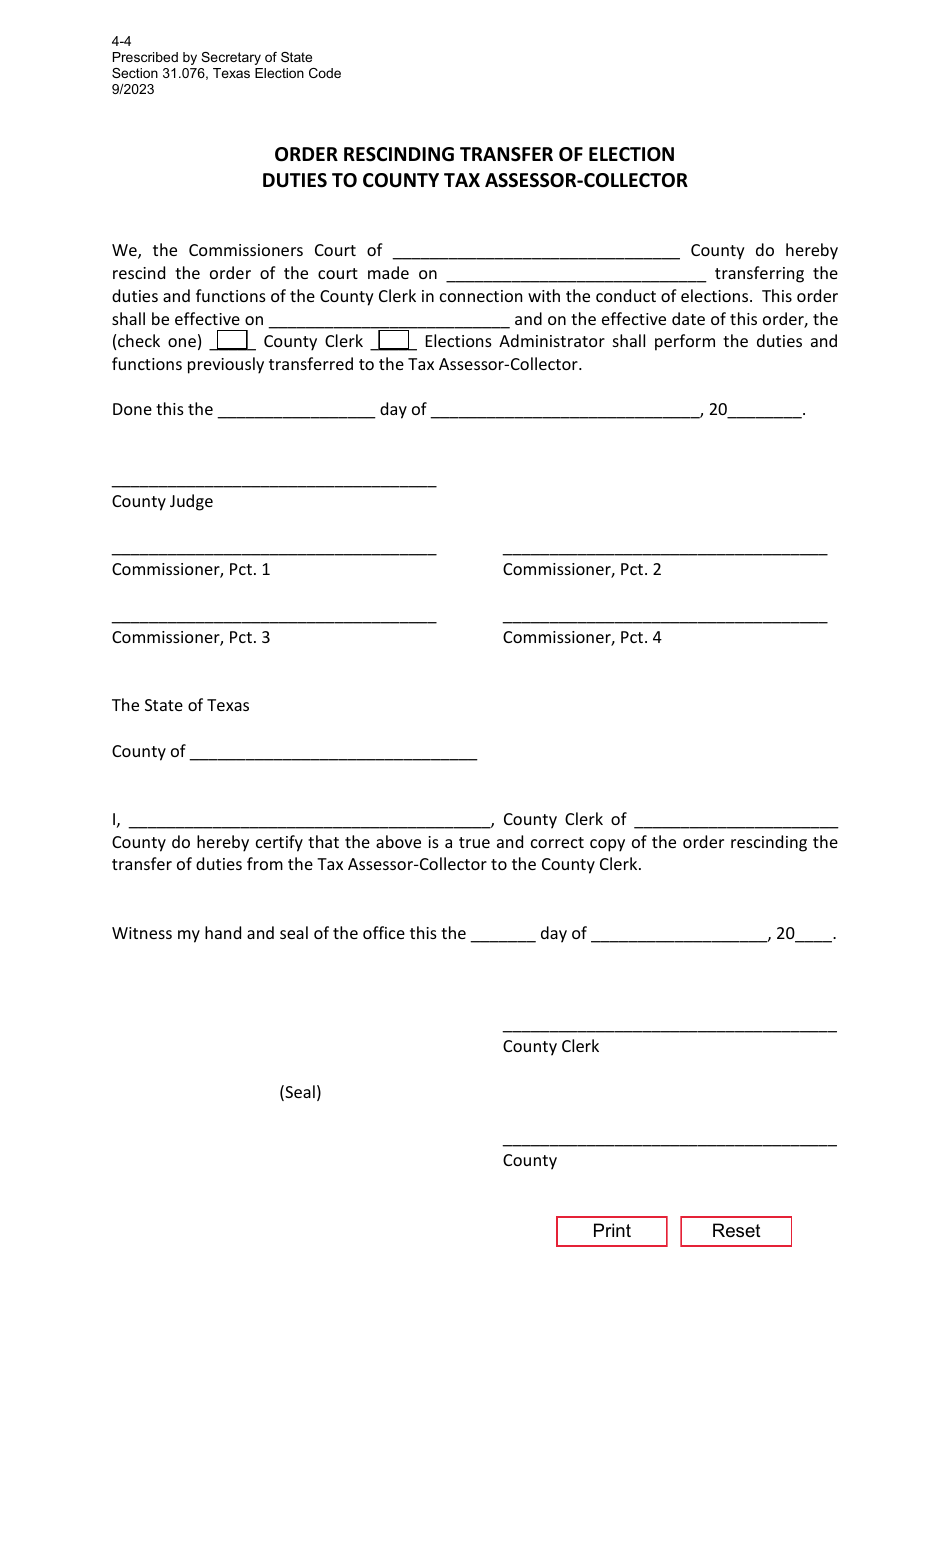 Form 4-4 Order Rescinding Transfer of Election Duties to County Tax Assessor-Collector - Texas, Page 1